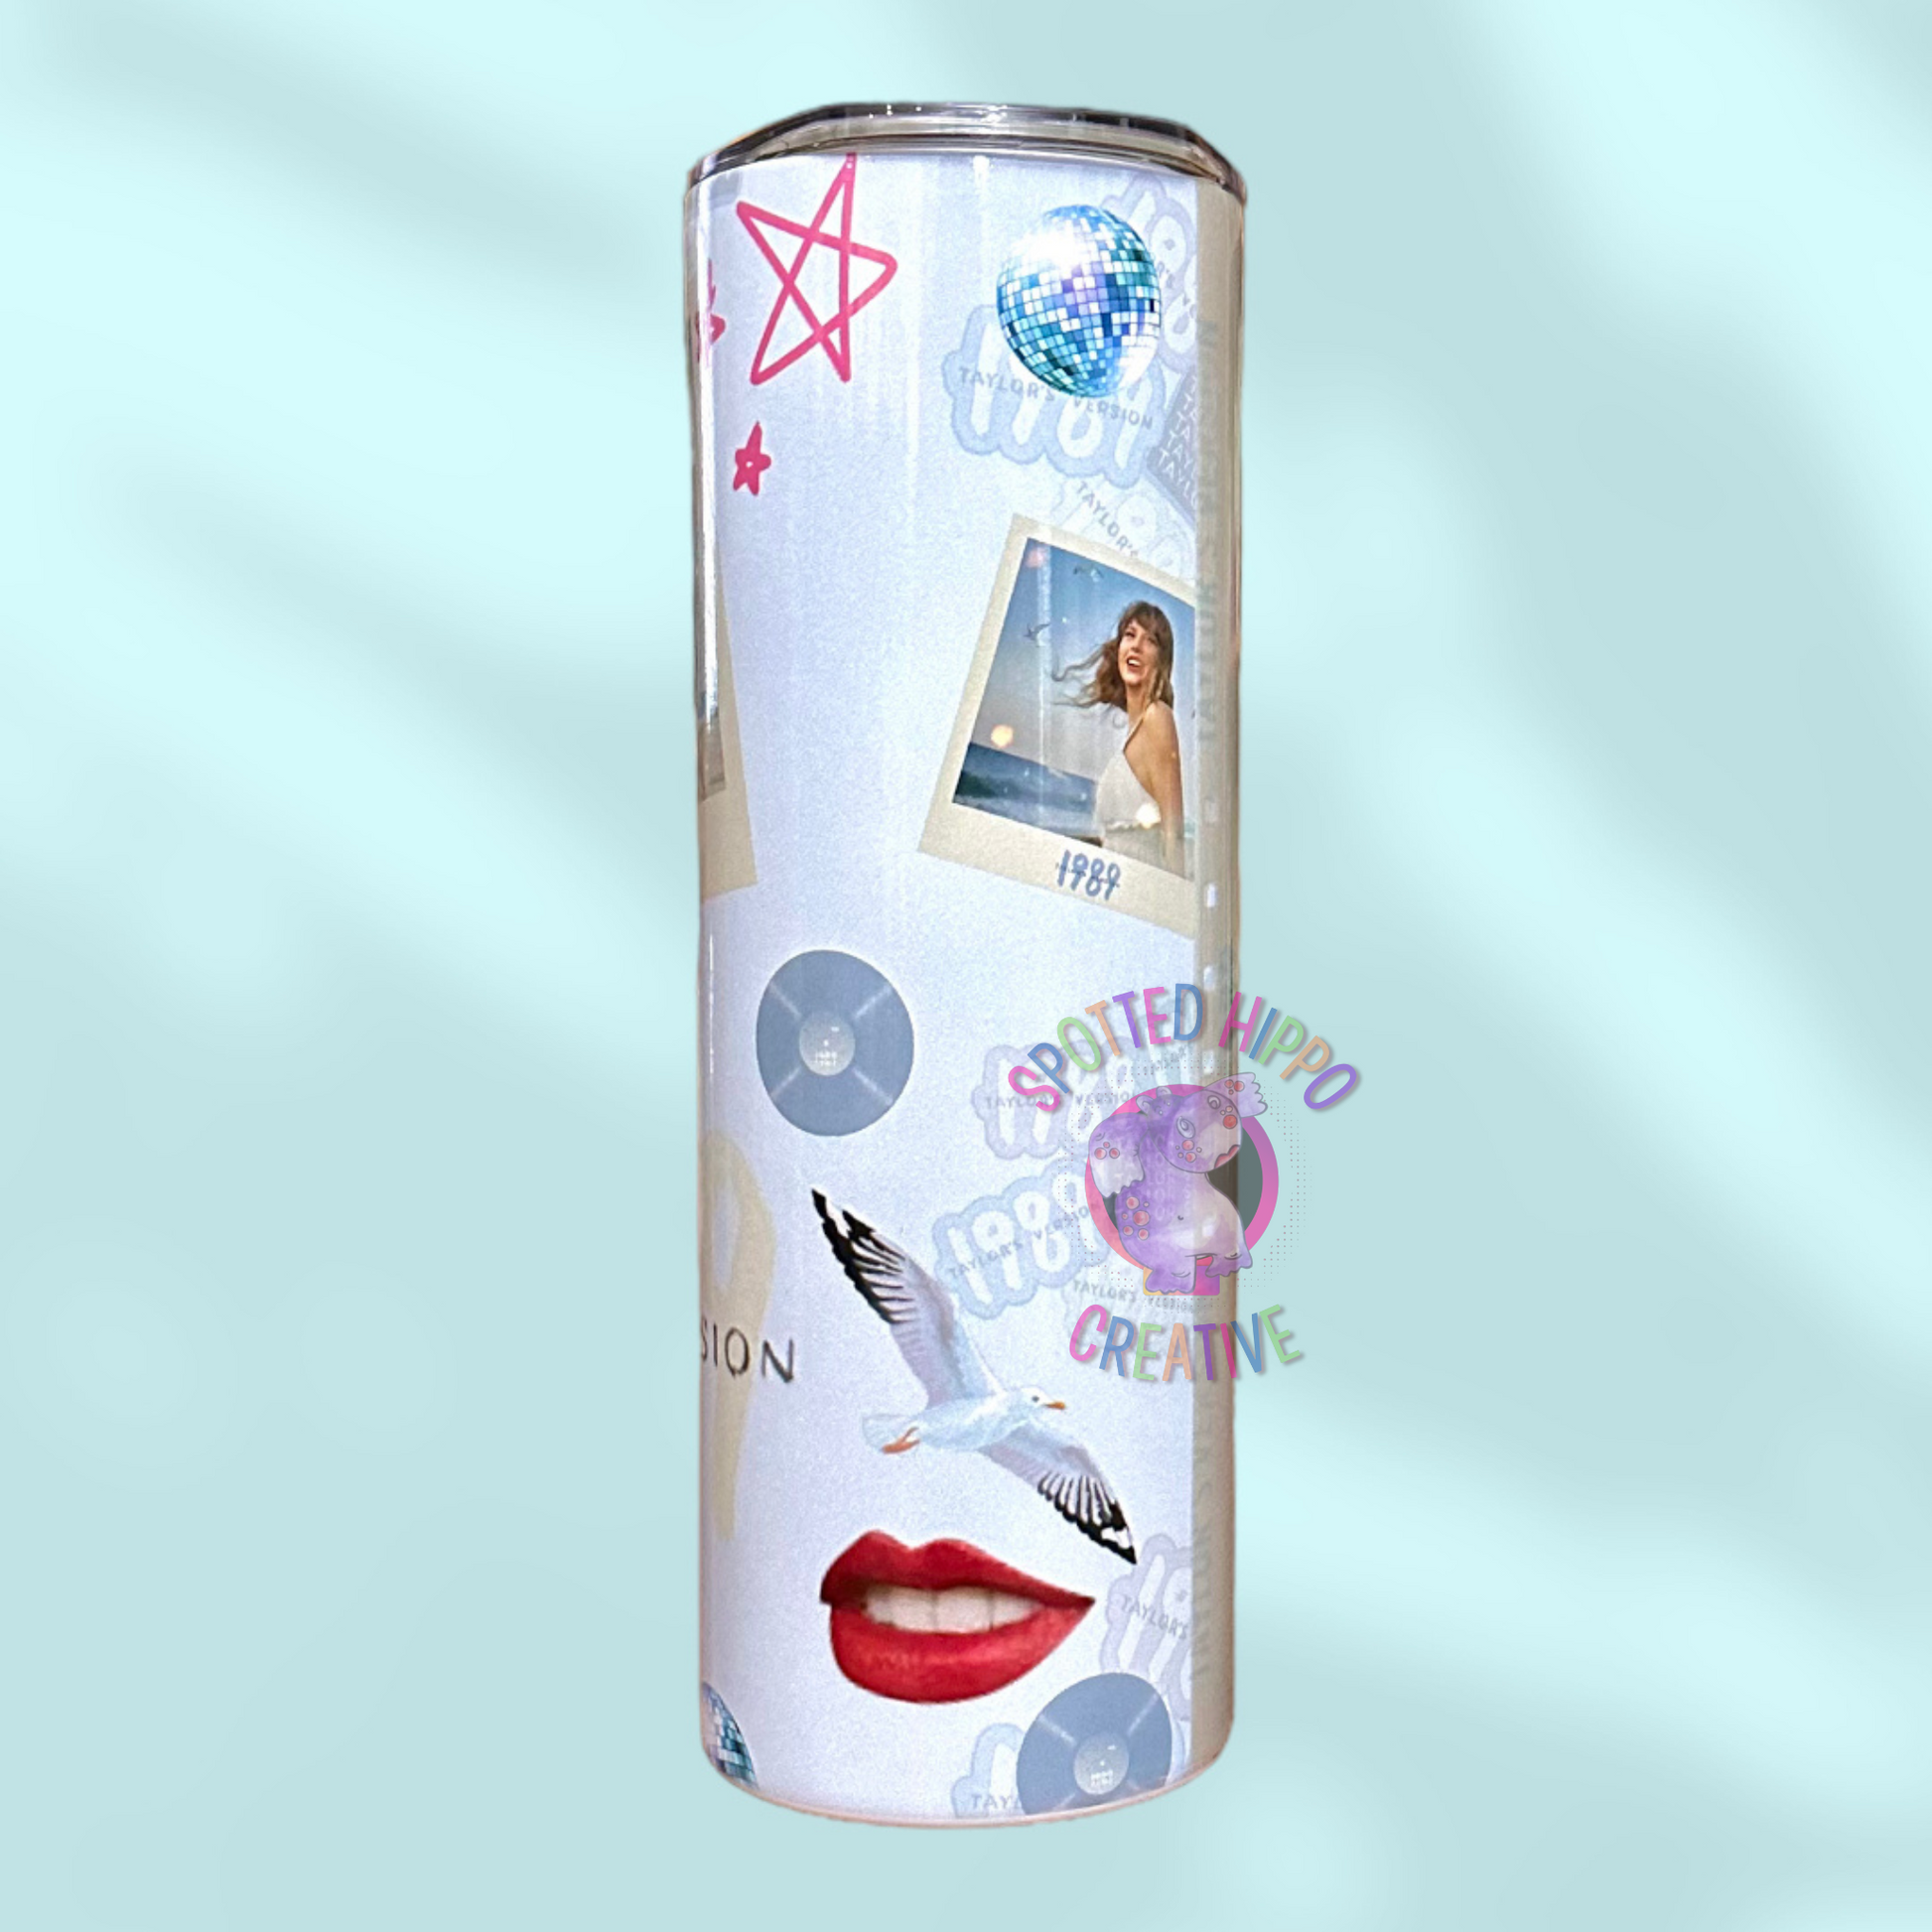 1989 Taylor’s Version Inspired Sublimation Tumbler